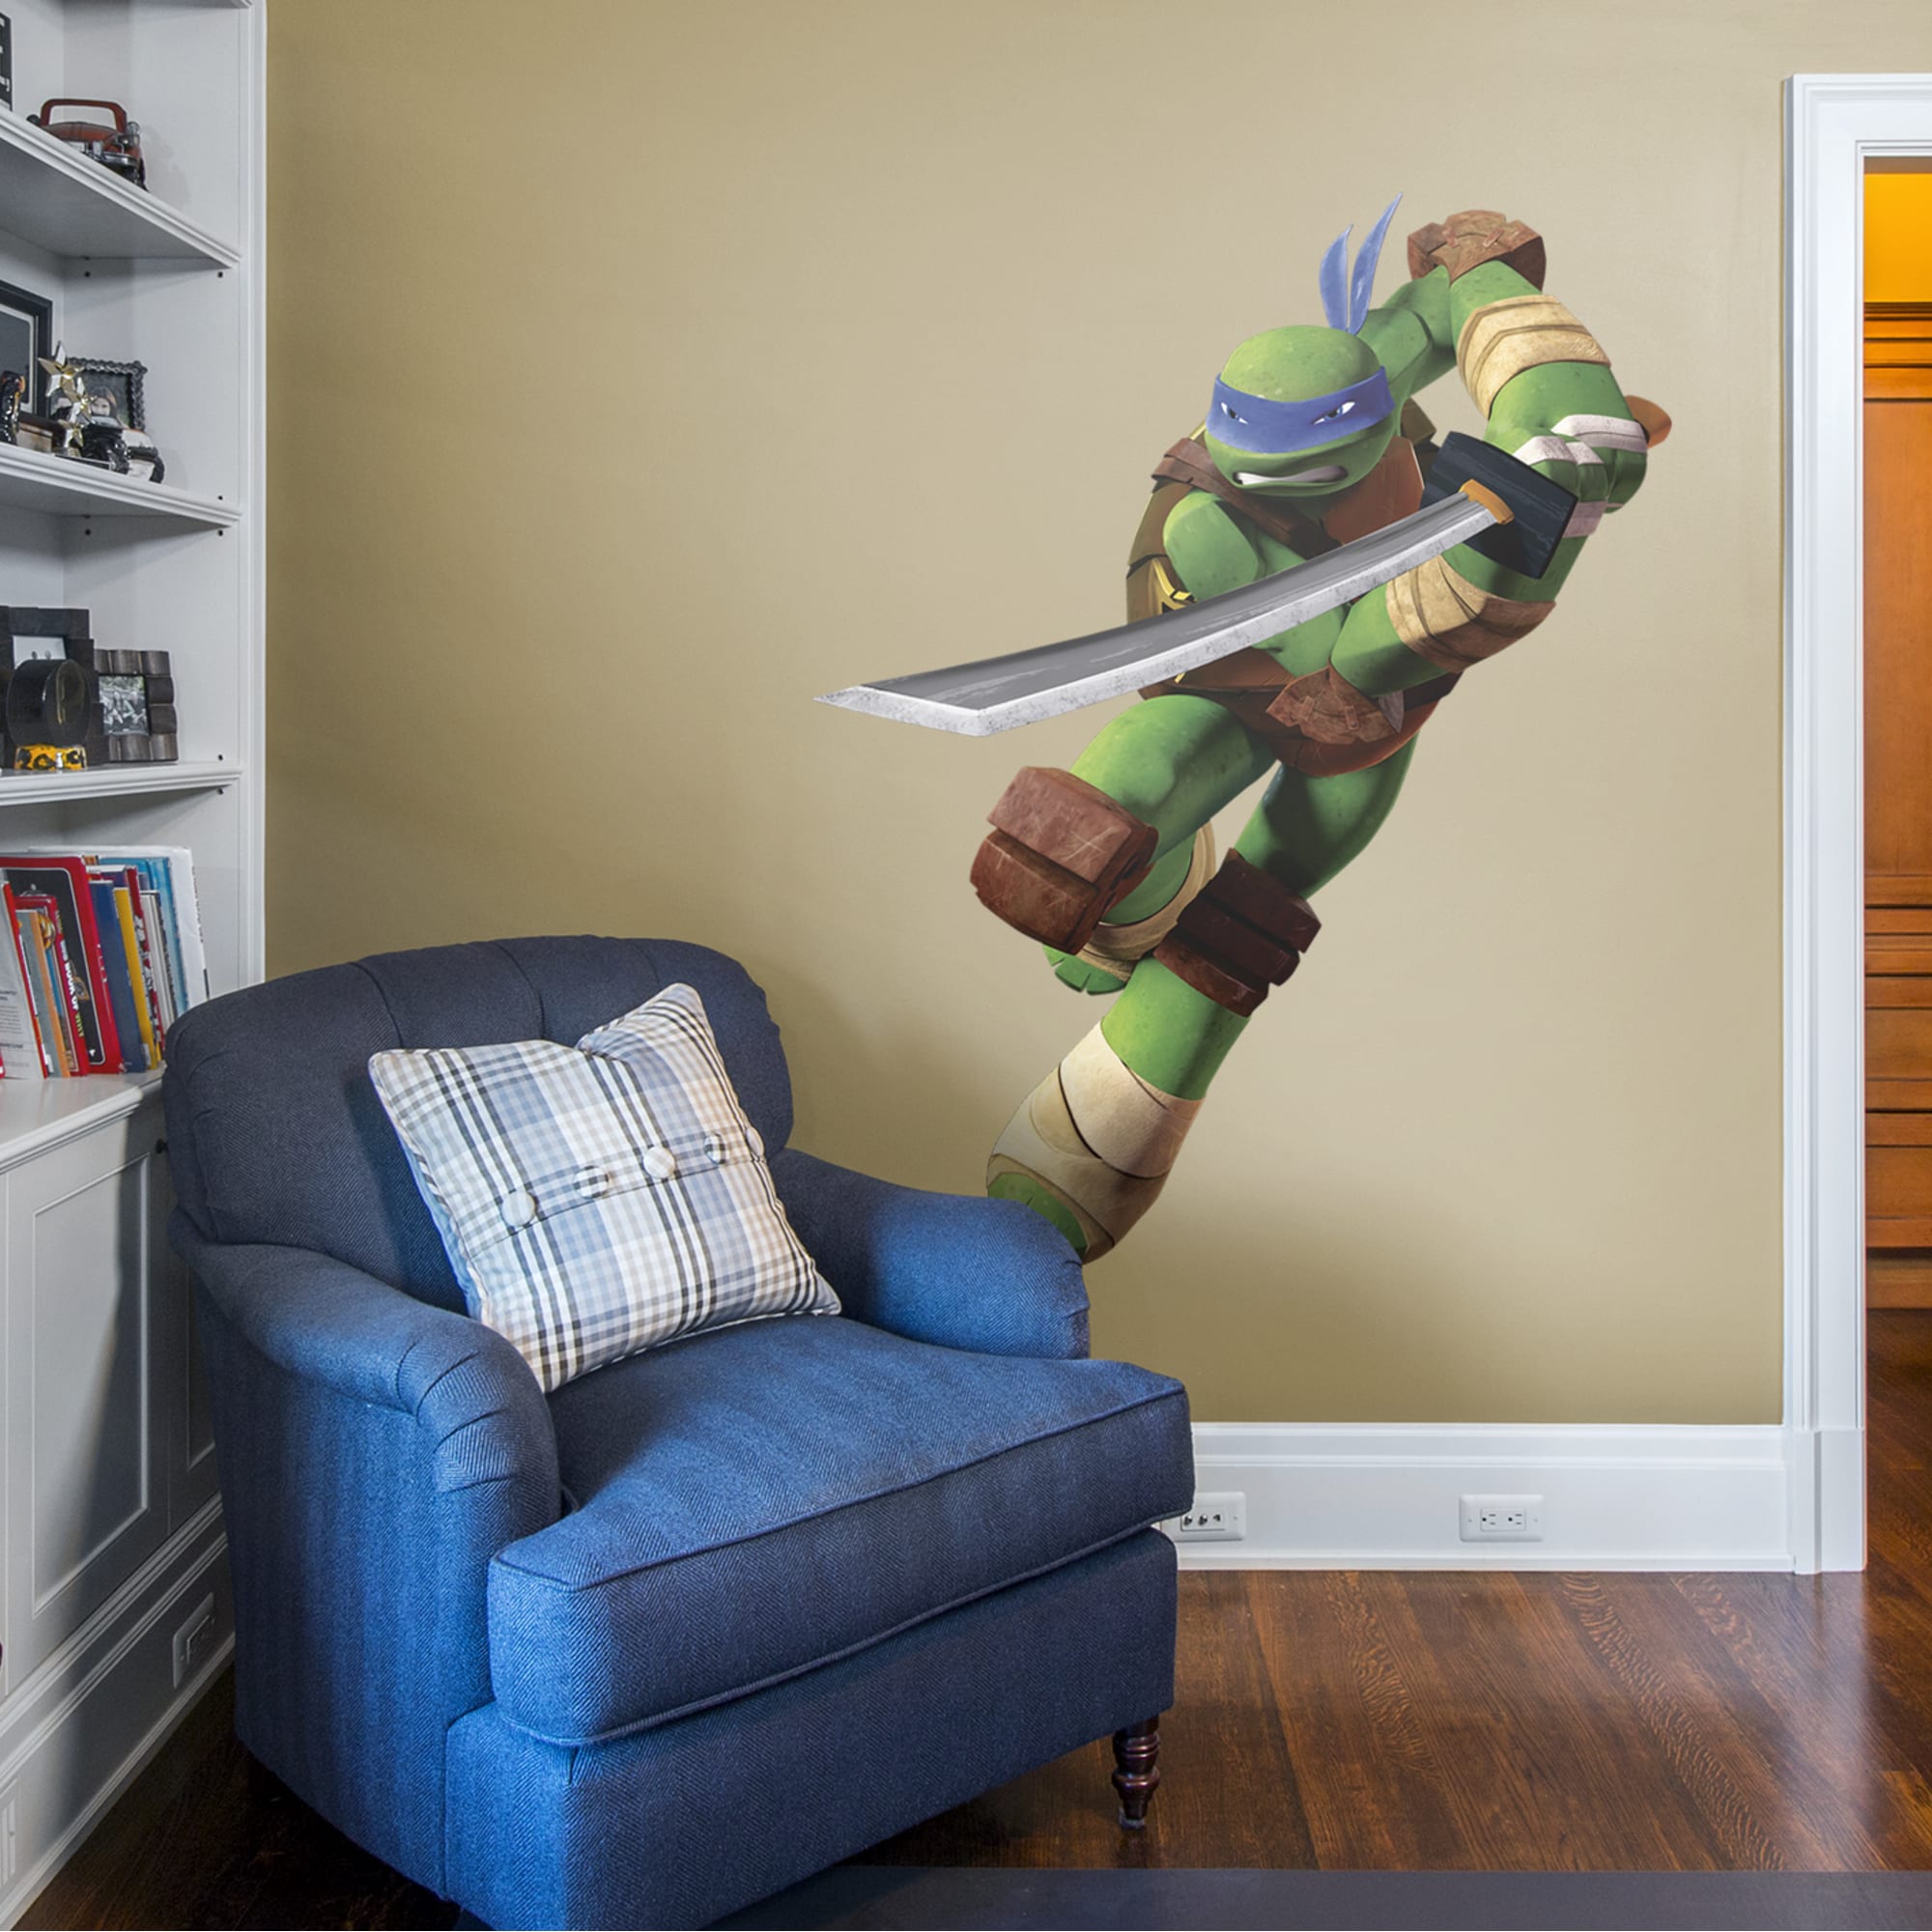 Leonardo - Officially Licensed Removable Wall Decal 50.0"W x 62.5"H by Fathead | Vinyl